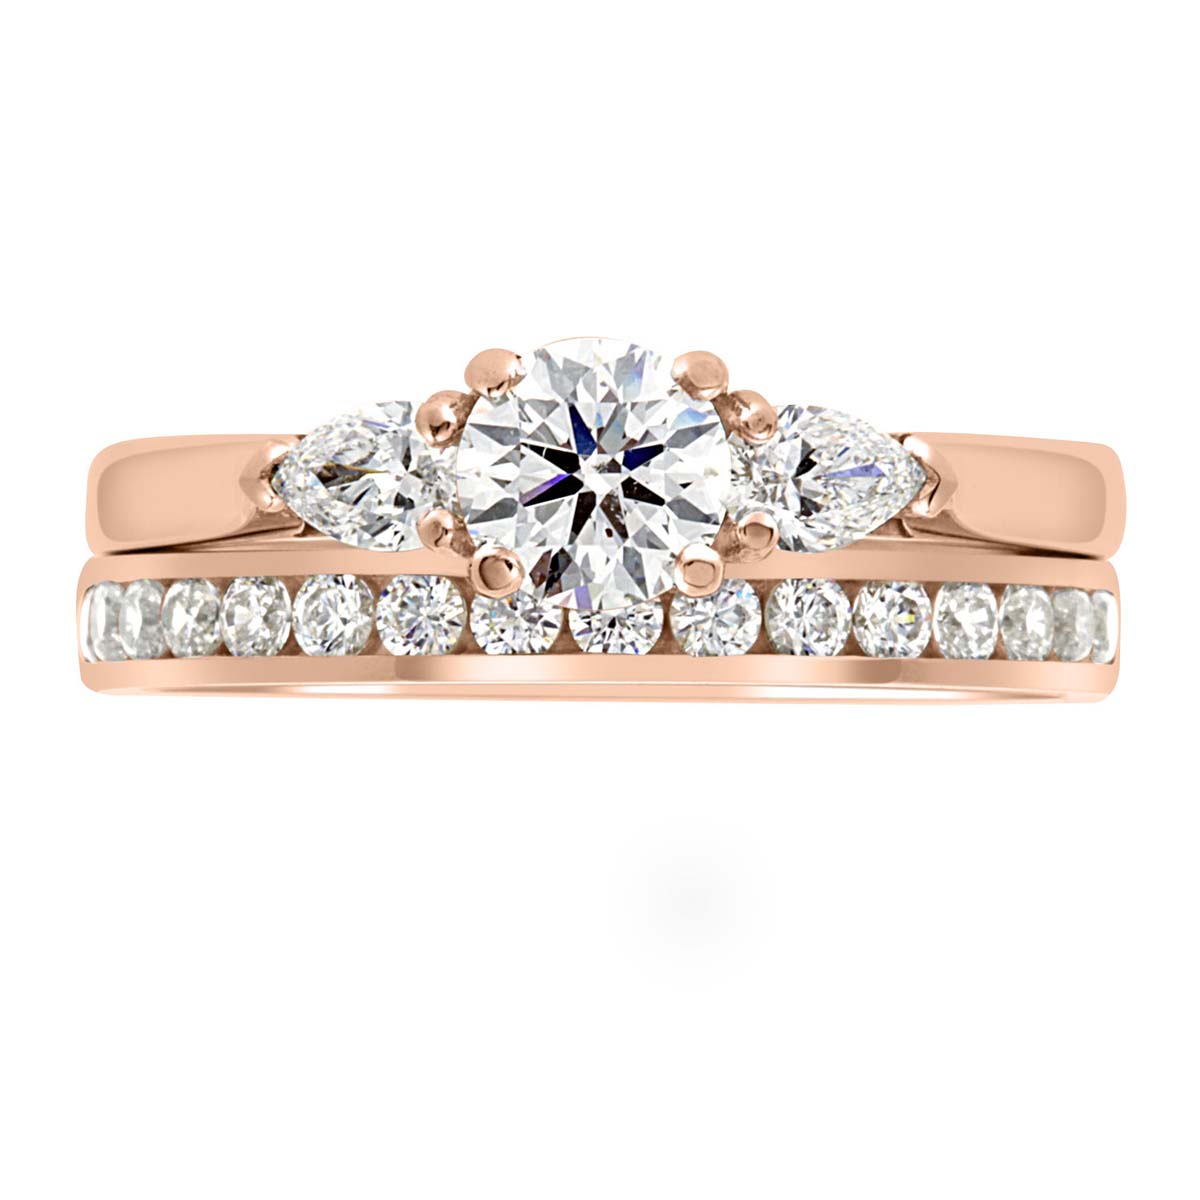 Round and Pear Diamond Ring in rose gold with a diamond wedding ring